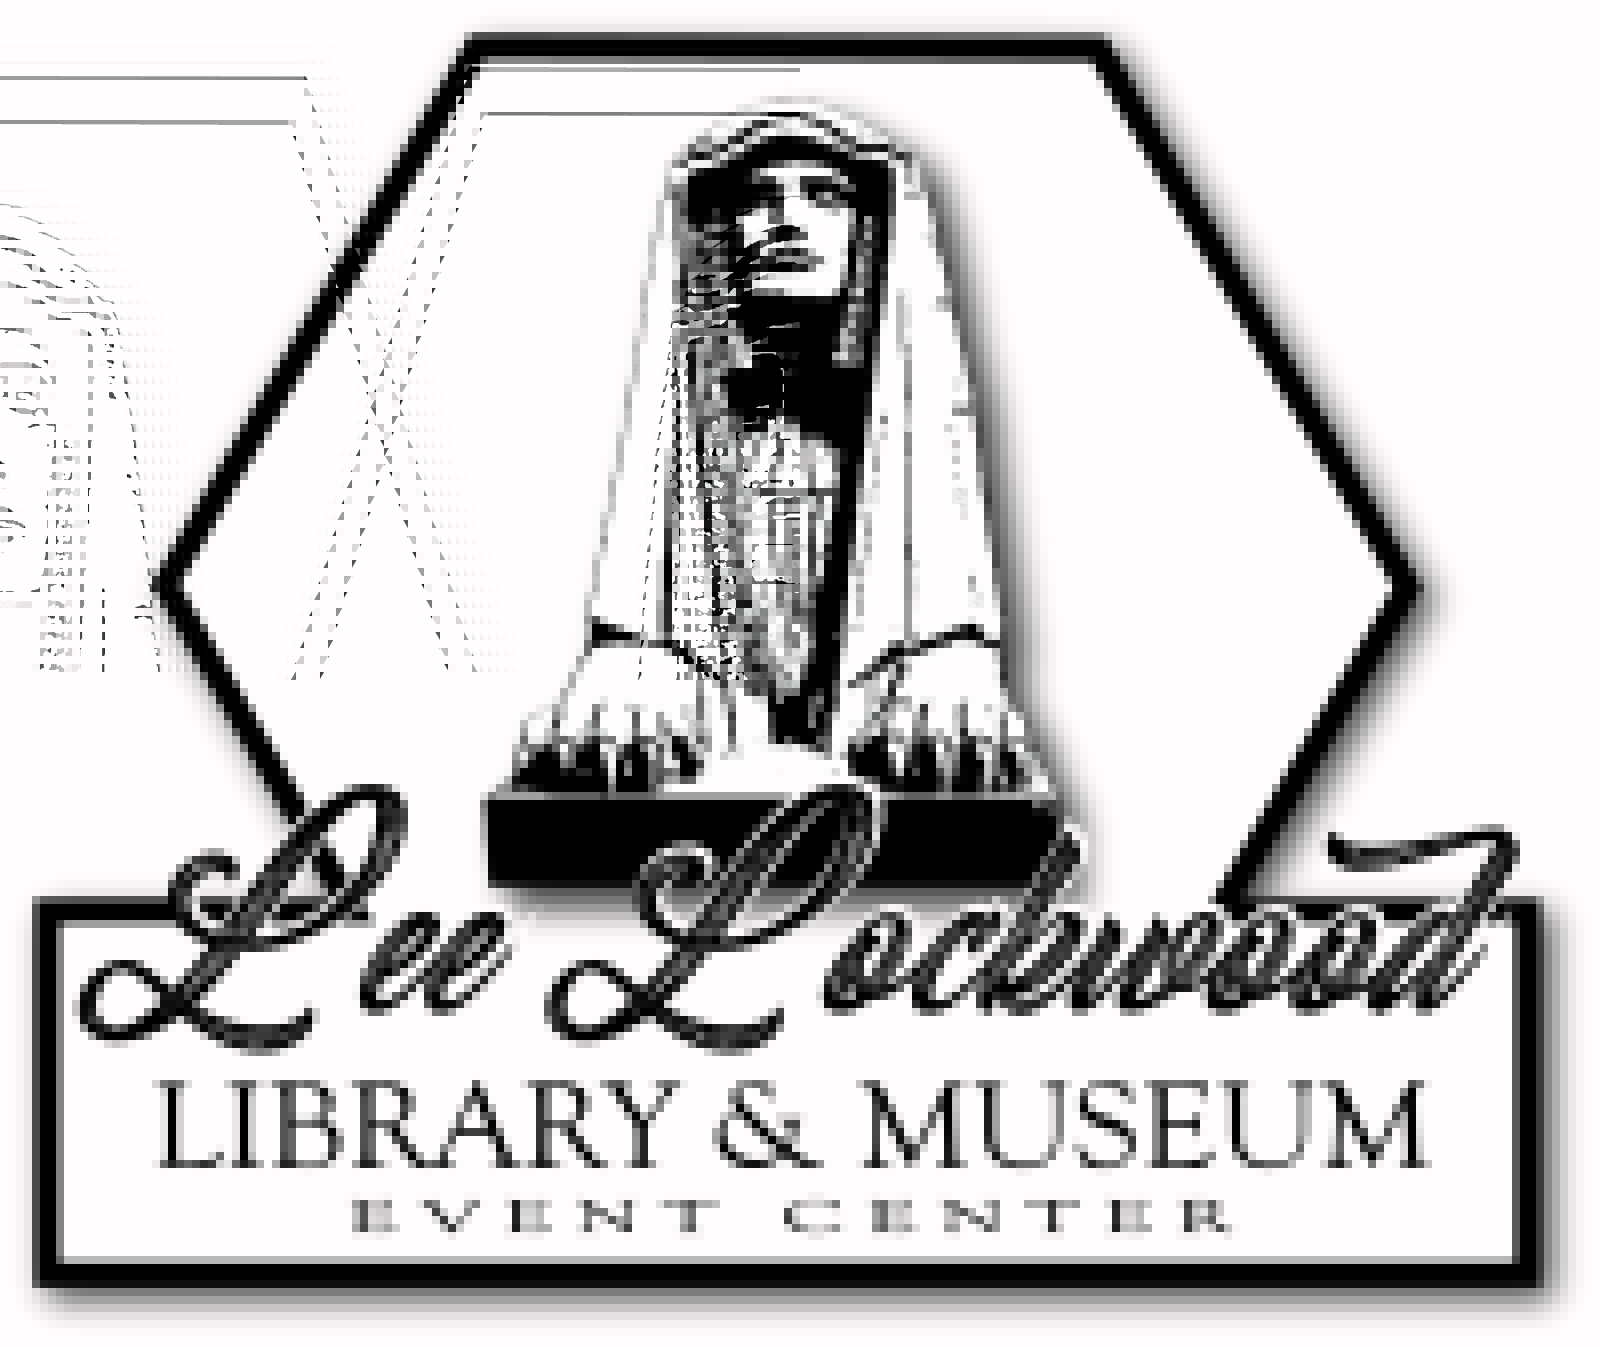 Lee Lockwood Library and Museum